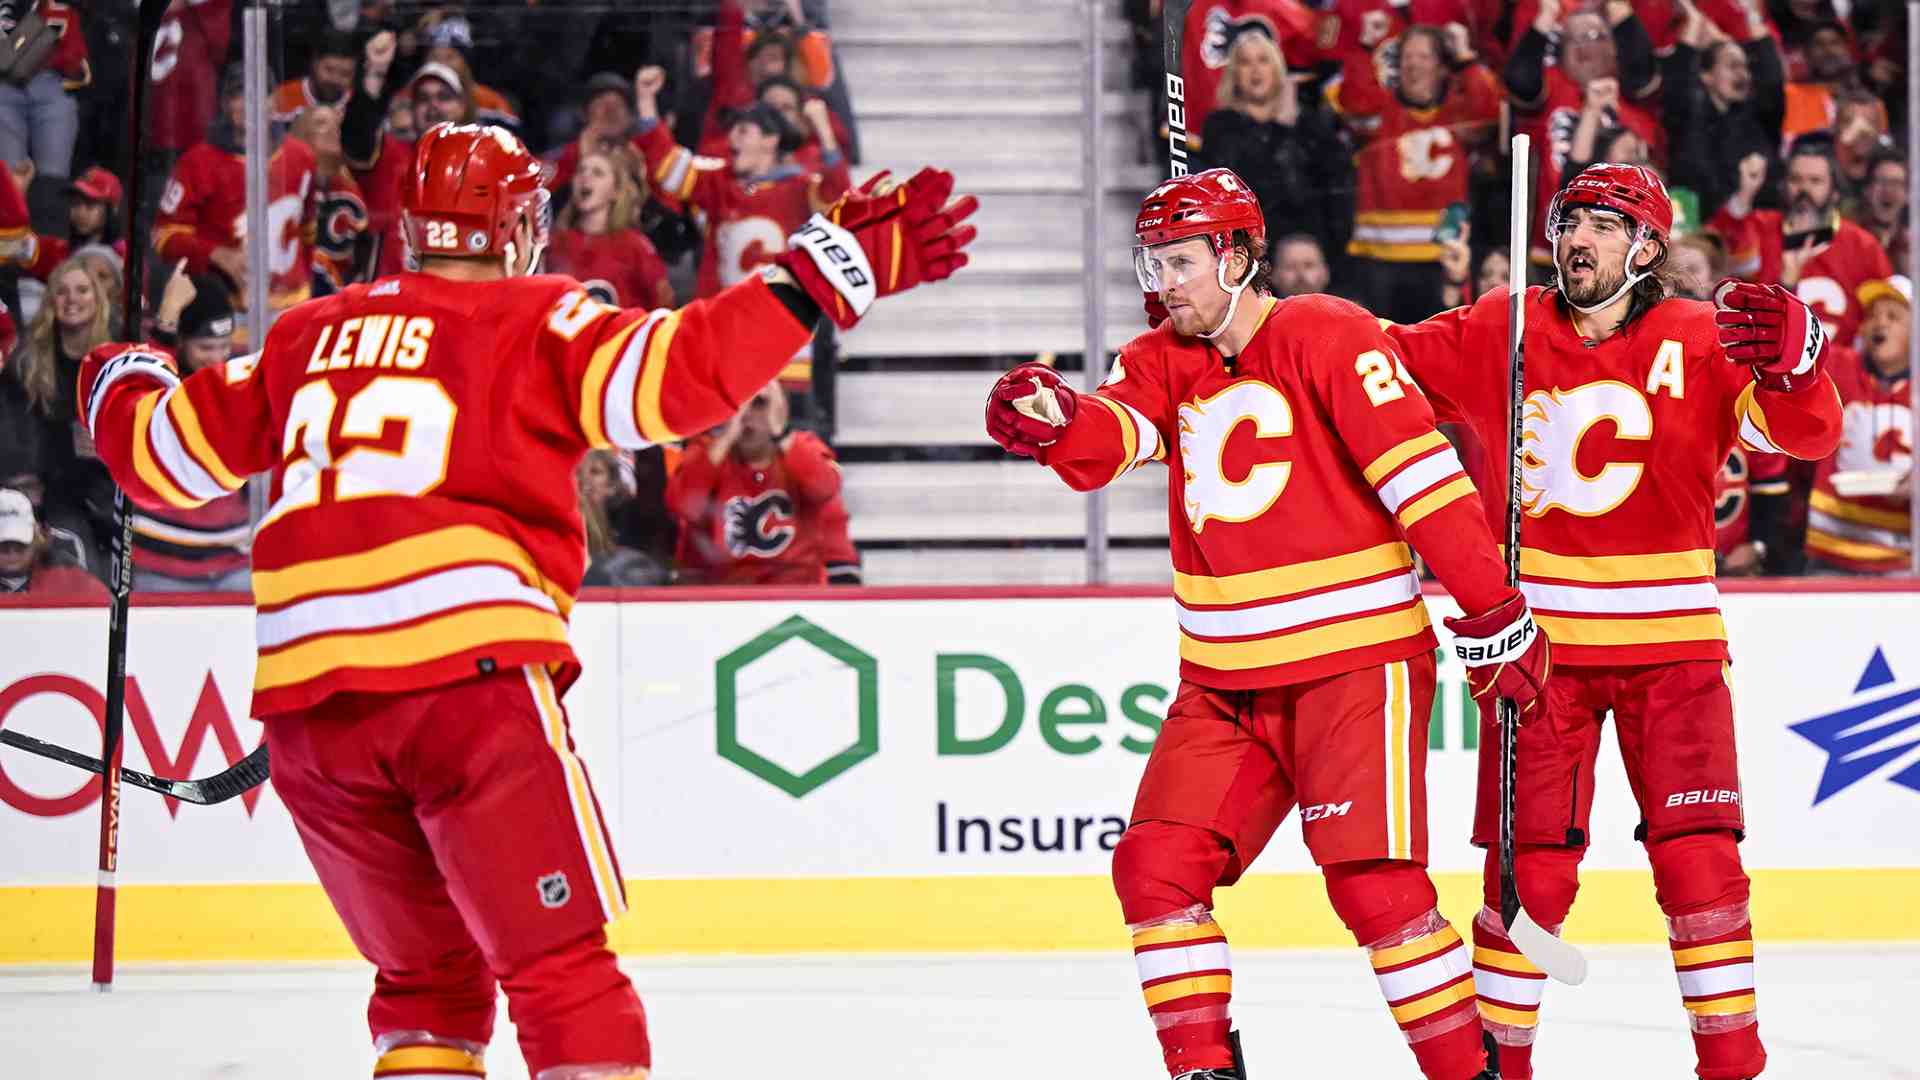 Live stream Seattle Kraken vs. Calgary Flames on fuboTV: Start with a 7-day free trial! Seattle Kraken vs. Calgary Flames NHL Free Live Stream Online